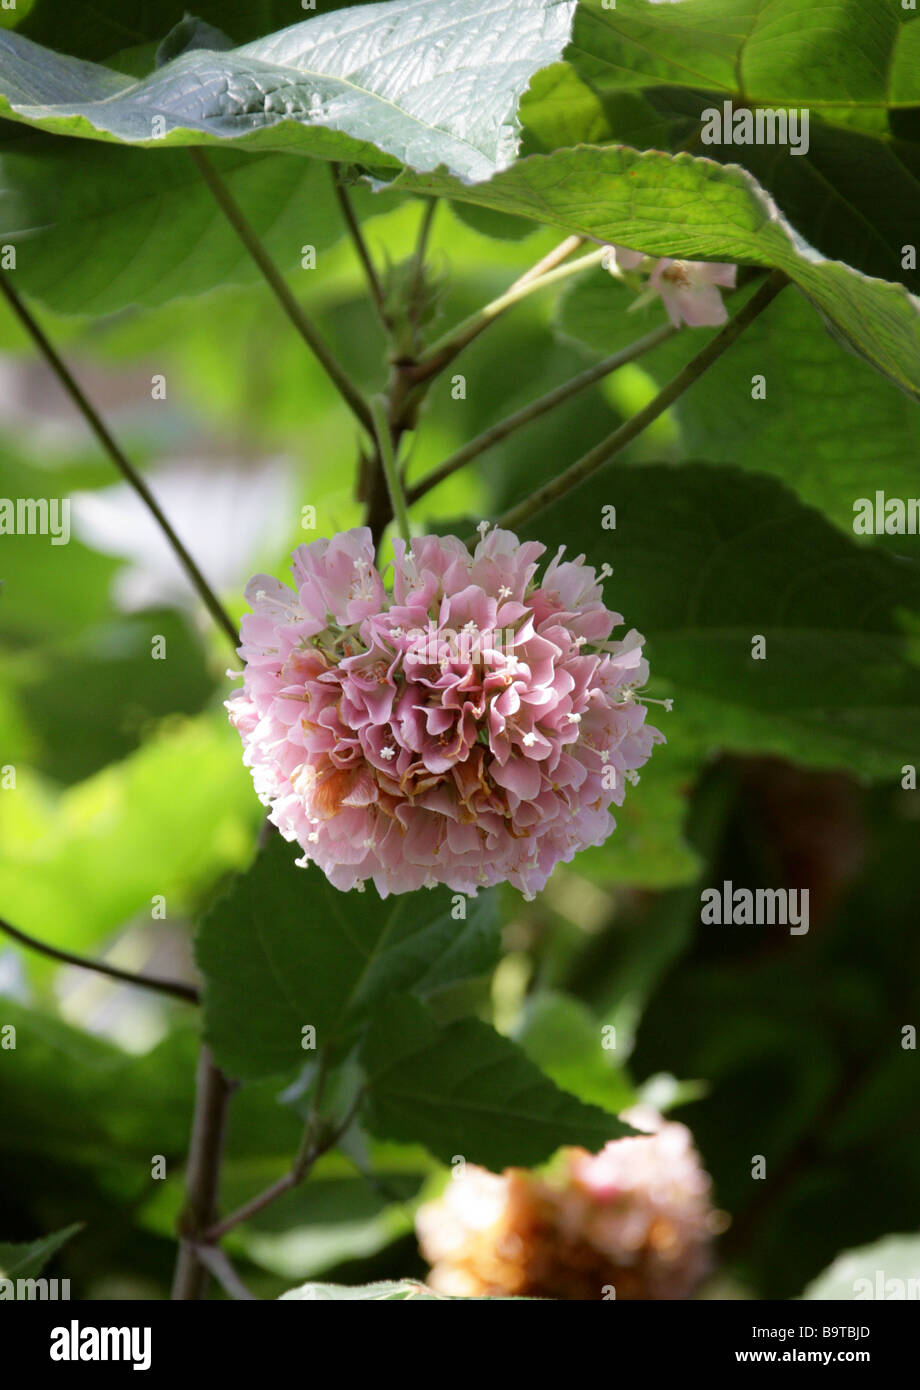 Pink Snowball, Dombeya cayeuxii, Malvaceae subfamily Dombeyoideae, Previously Classified in Sterculiaceae, Africa Stock Photo